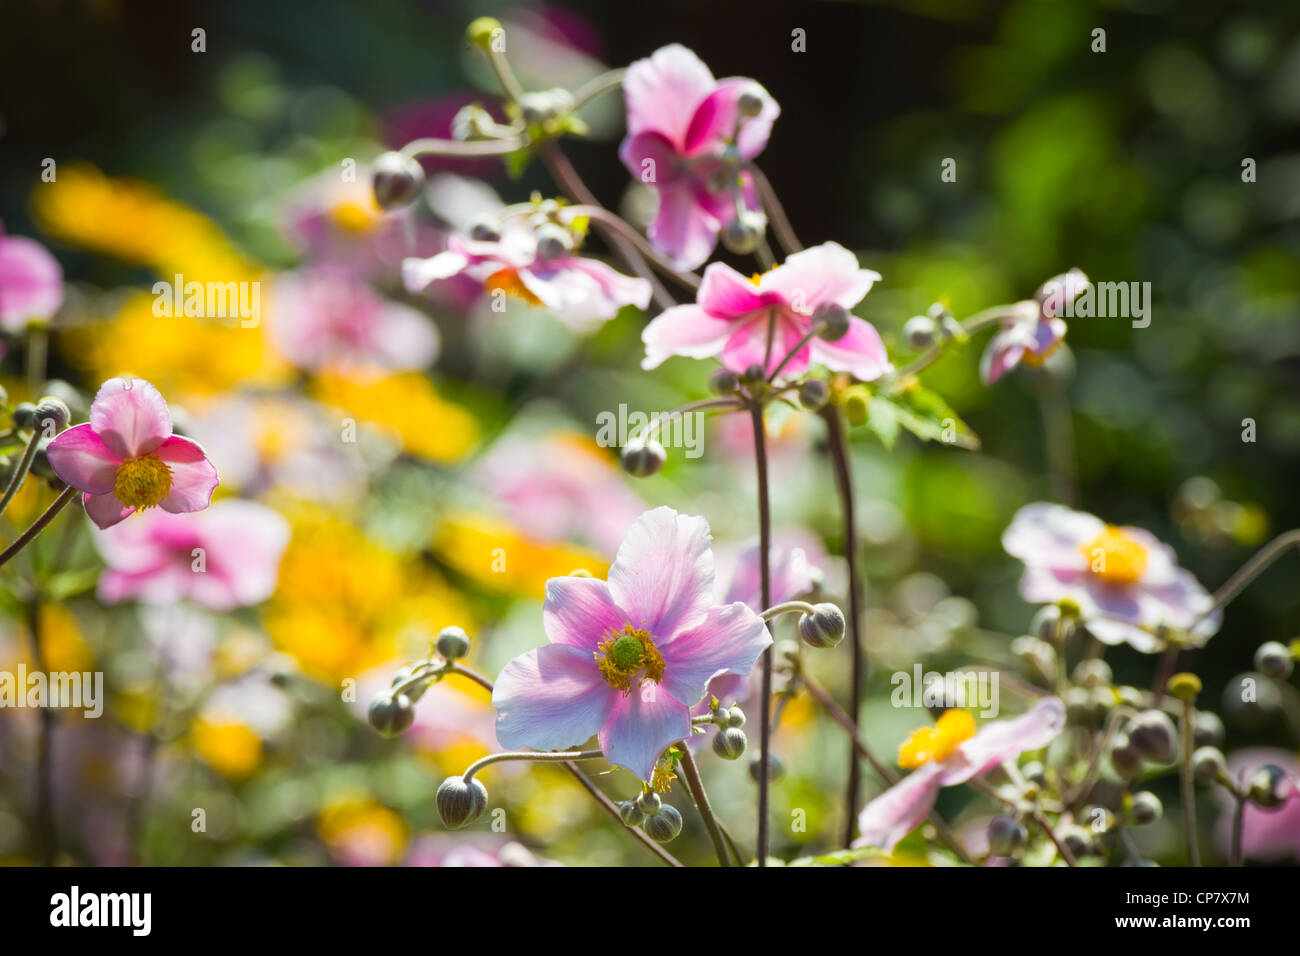 Pink Japanese Anemone or Anemone japonica flowers blooming in summer with background of yellow flowers - horizontal Stock Photo